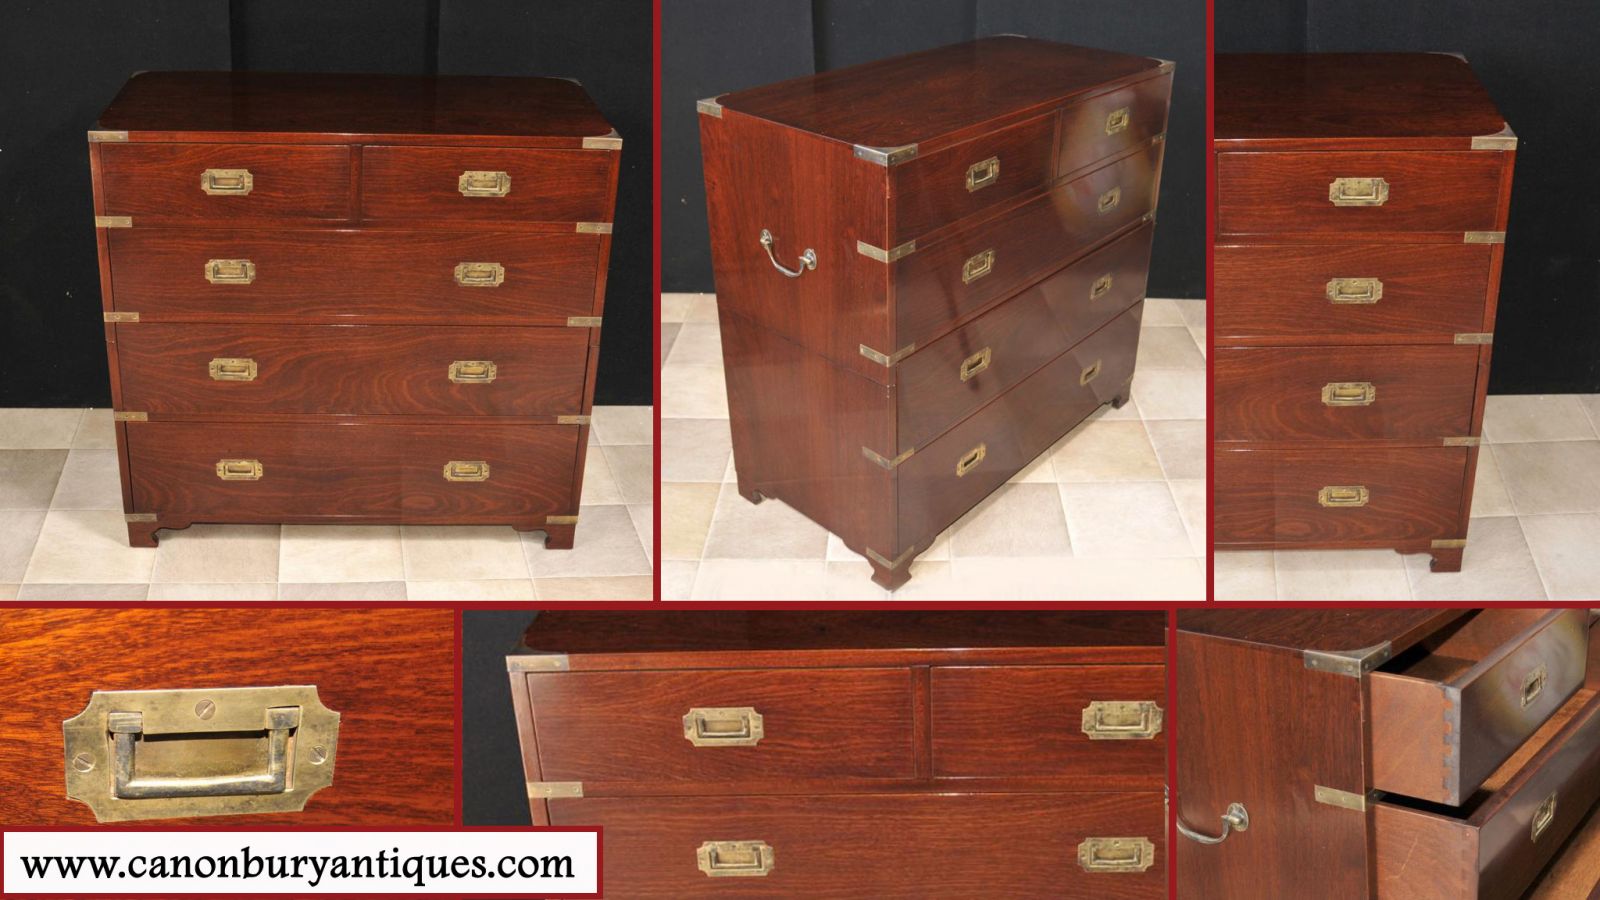 Mahogany Campaign Chest of Drawers Colonial Furniture